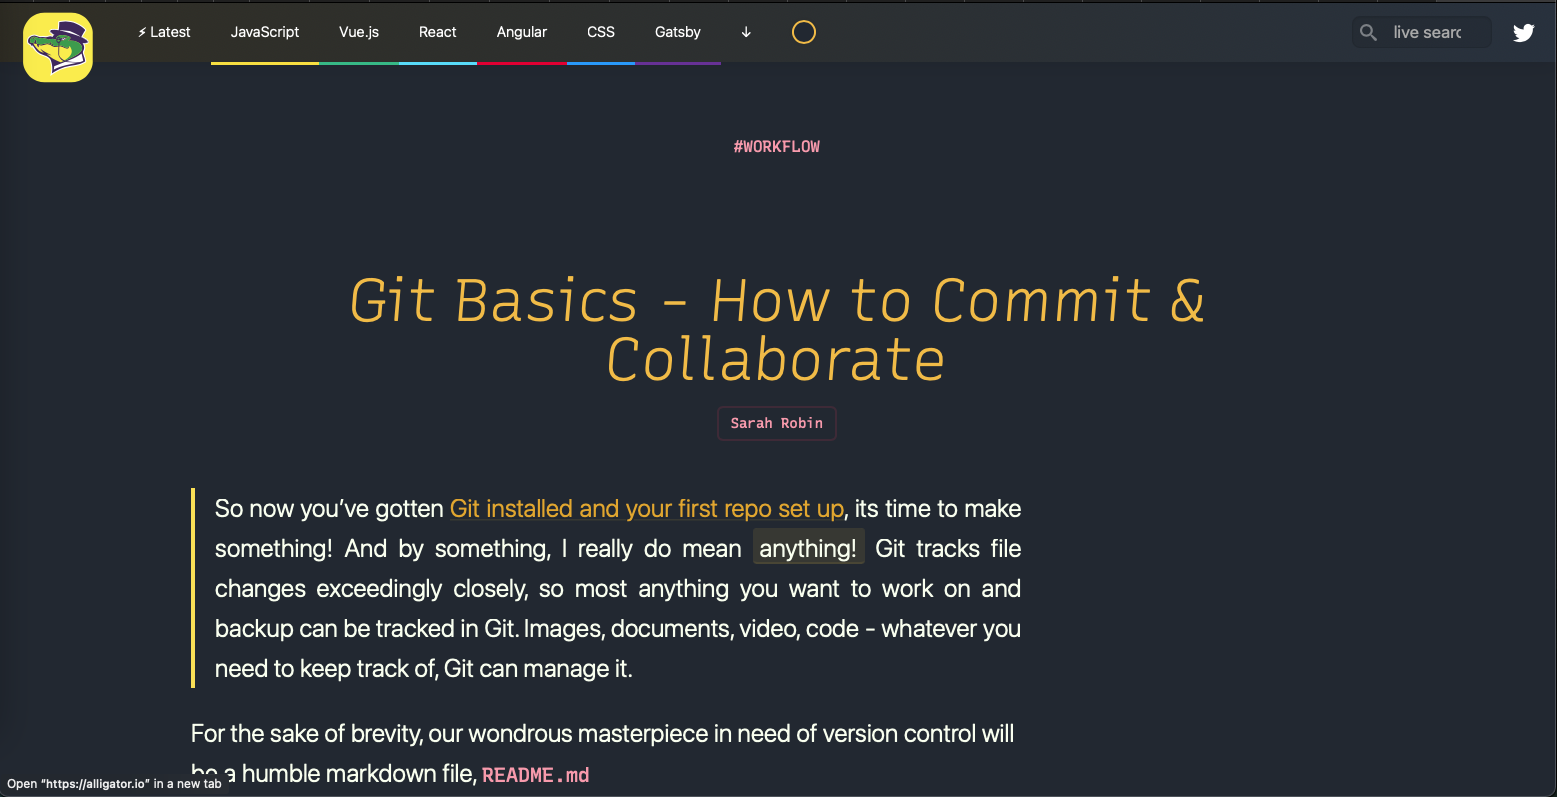 A screenshot of the second article in the git basics series on Alligator.io